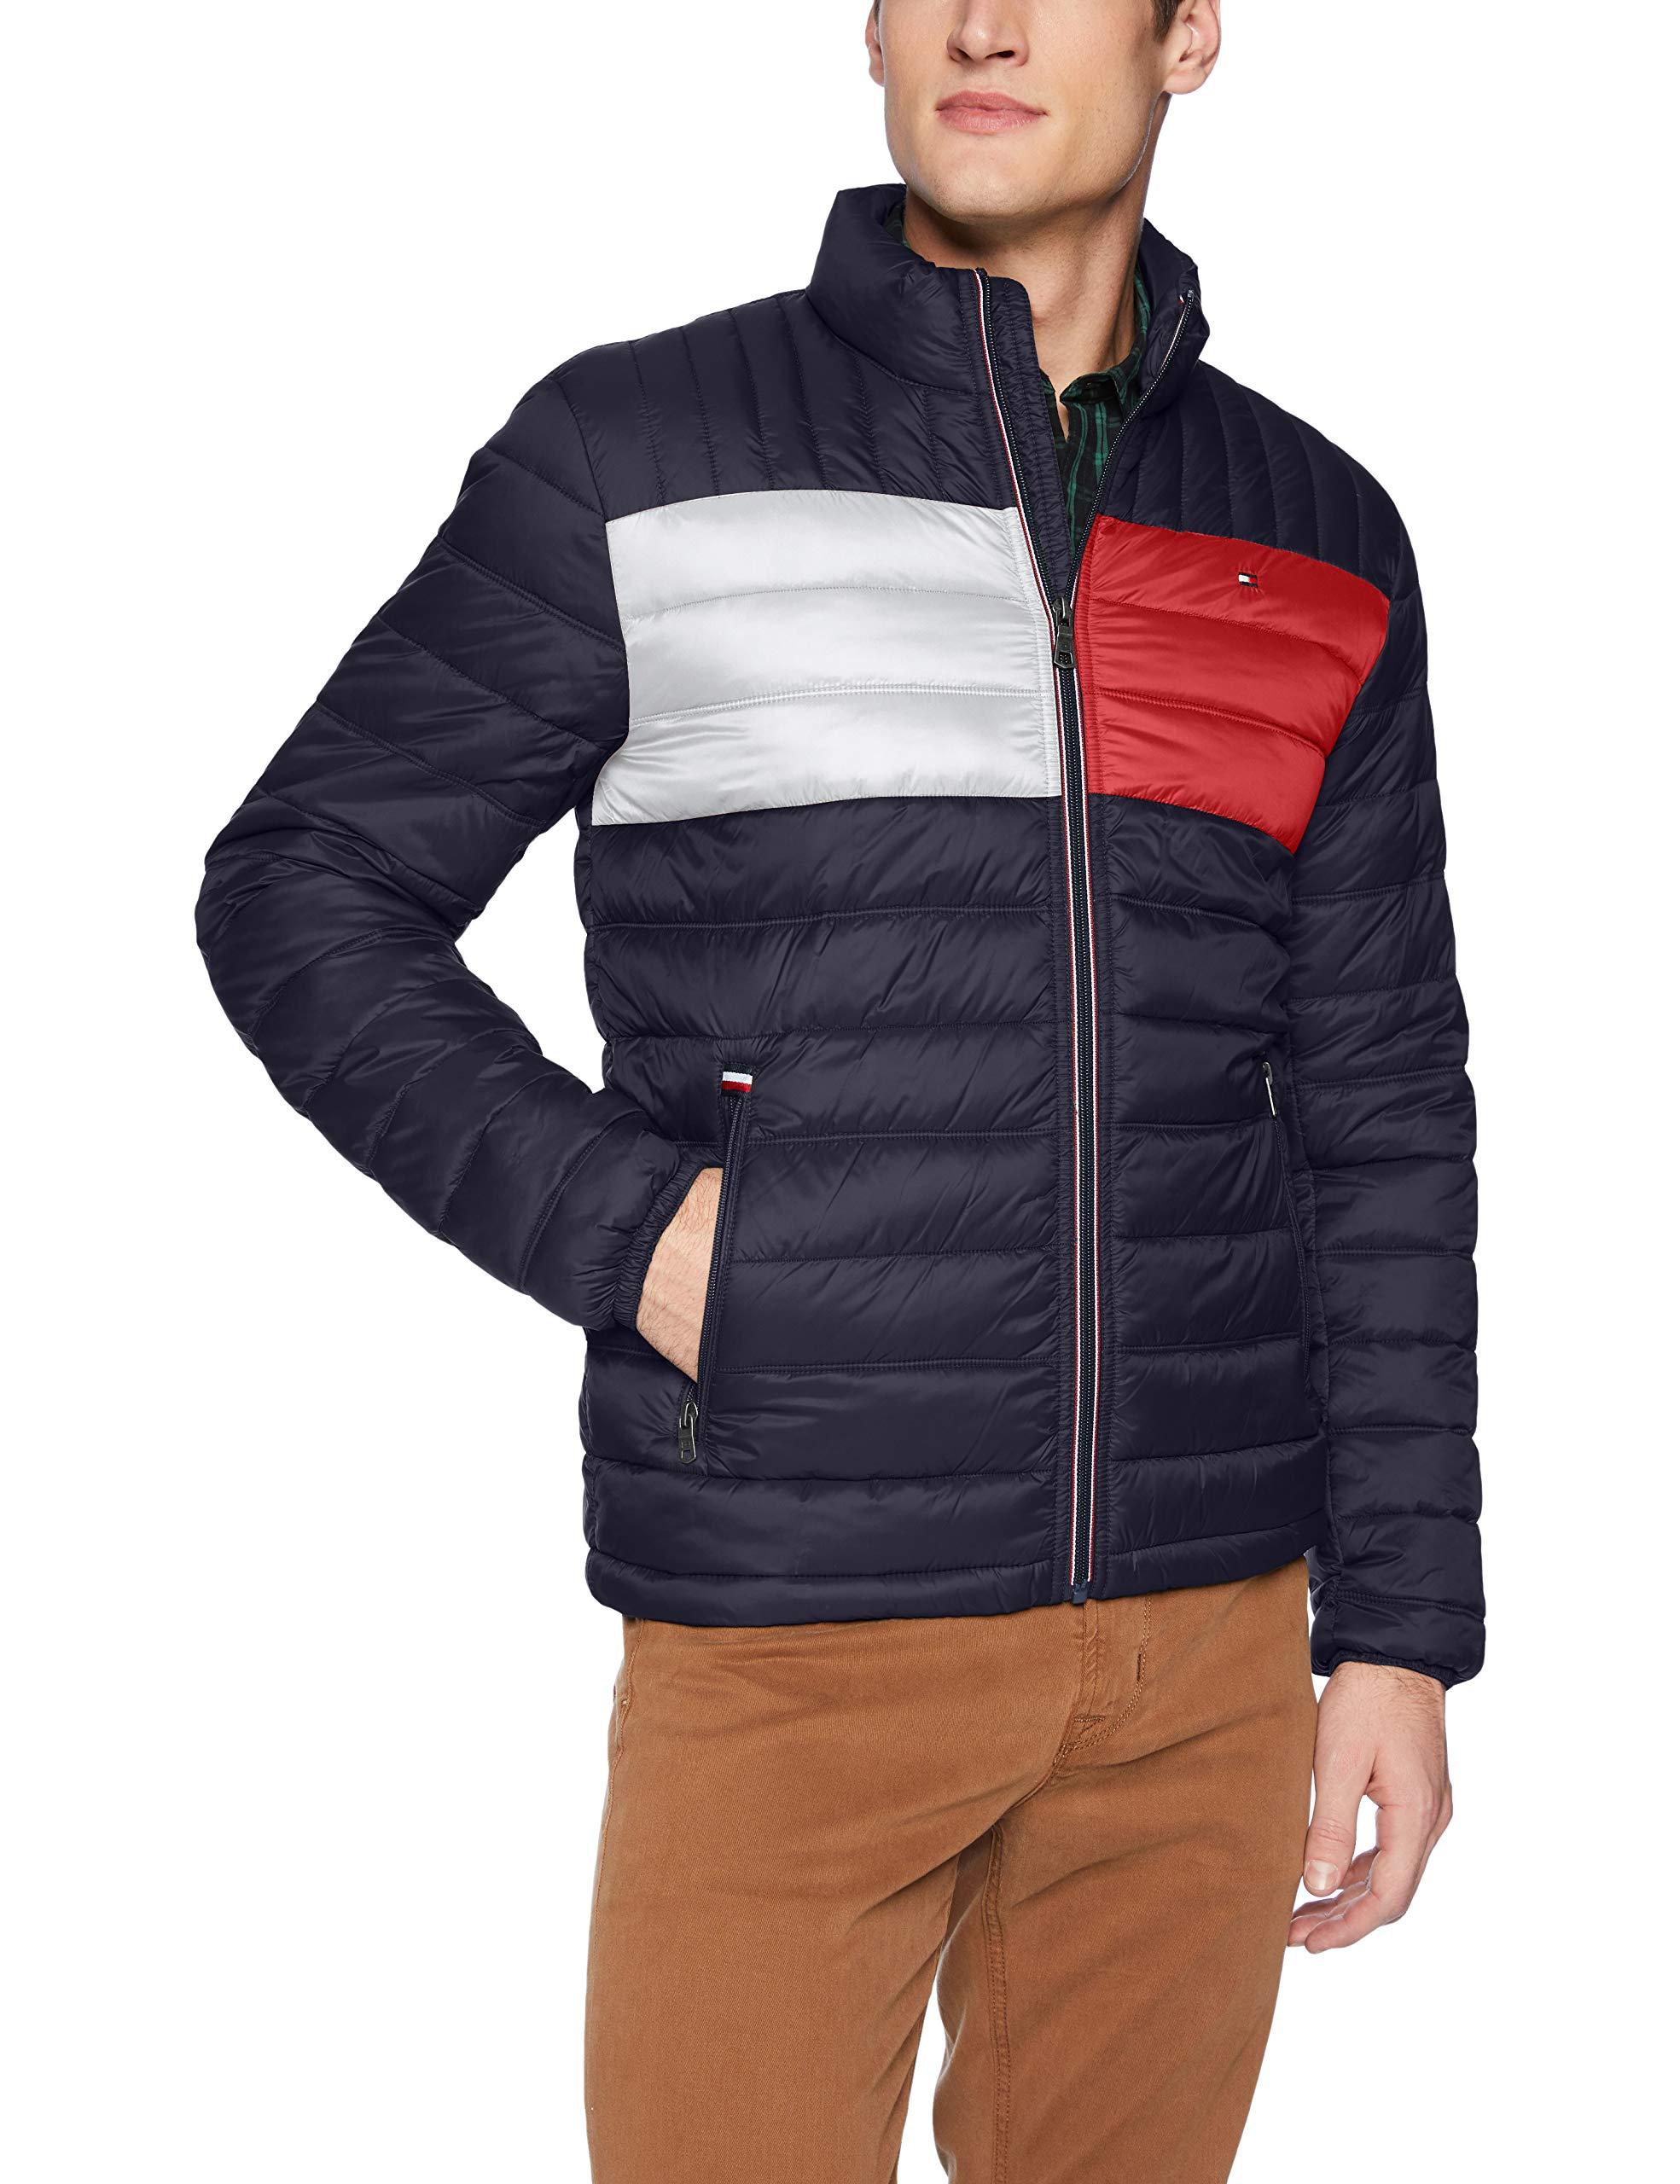 New Tommy Hilfiger Men's Ultra Loft Insulated Classic Hooded Puffer Jacket Coat 